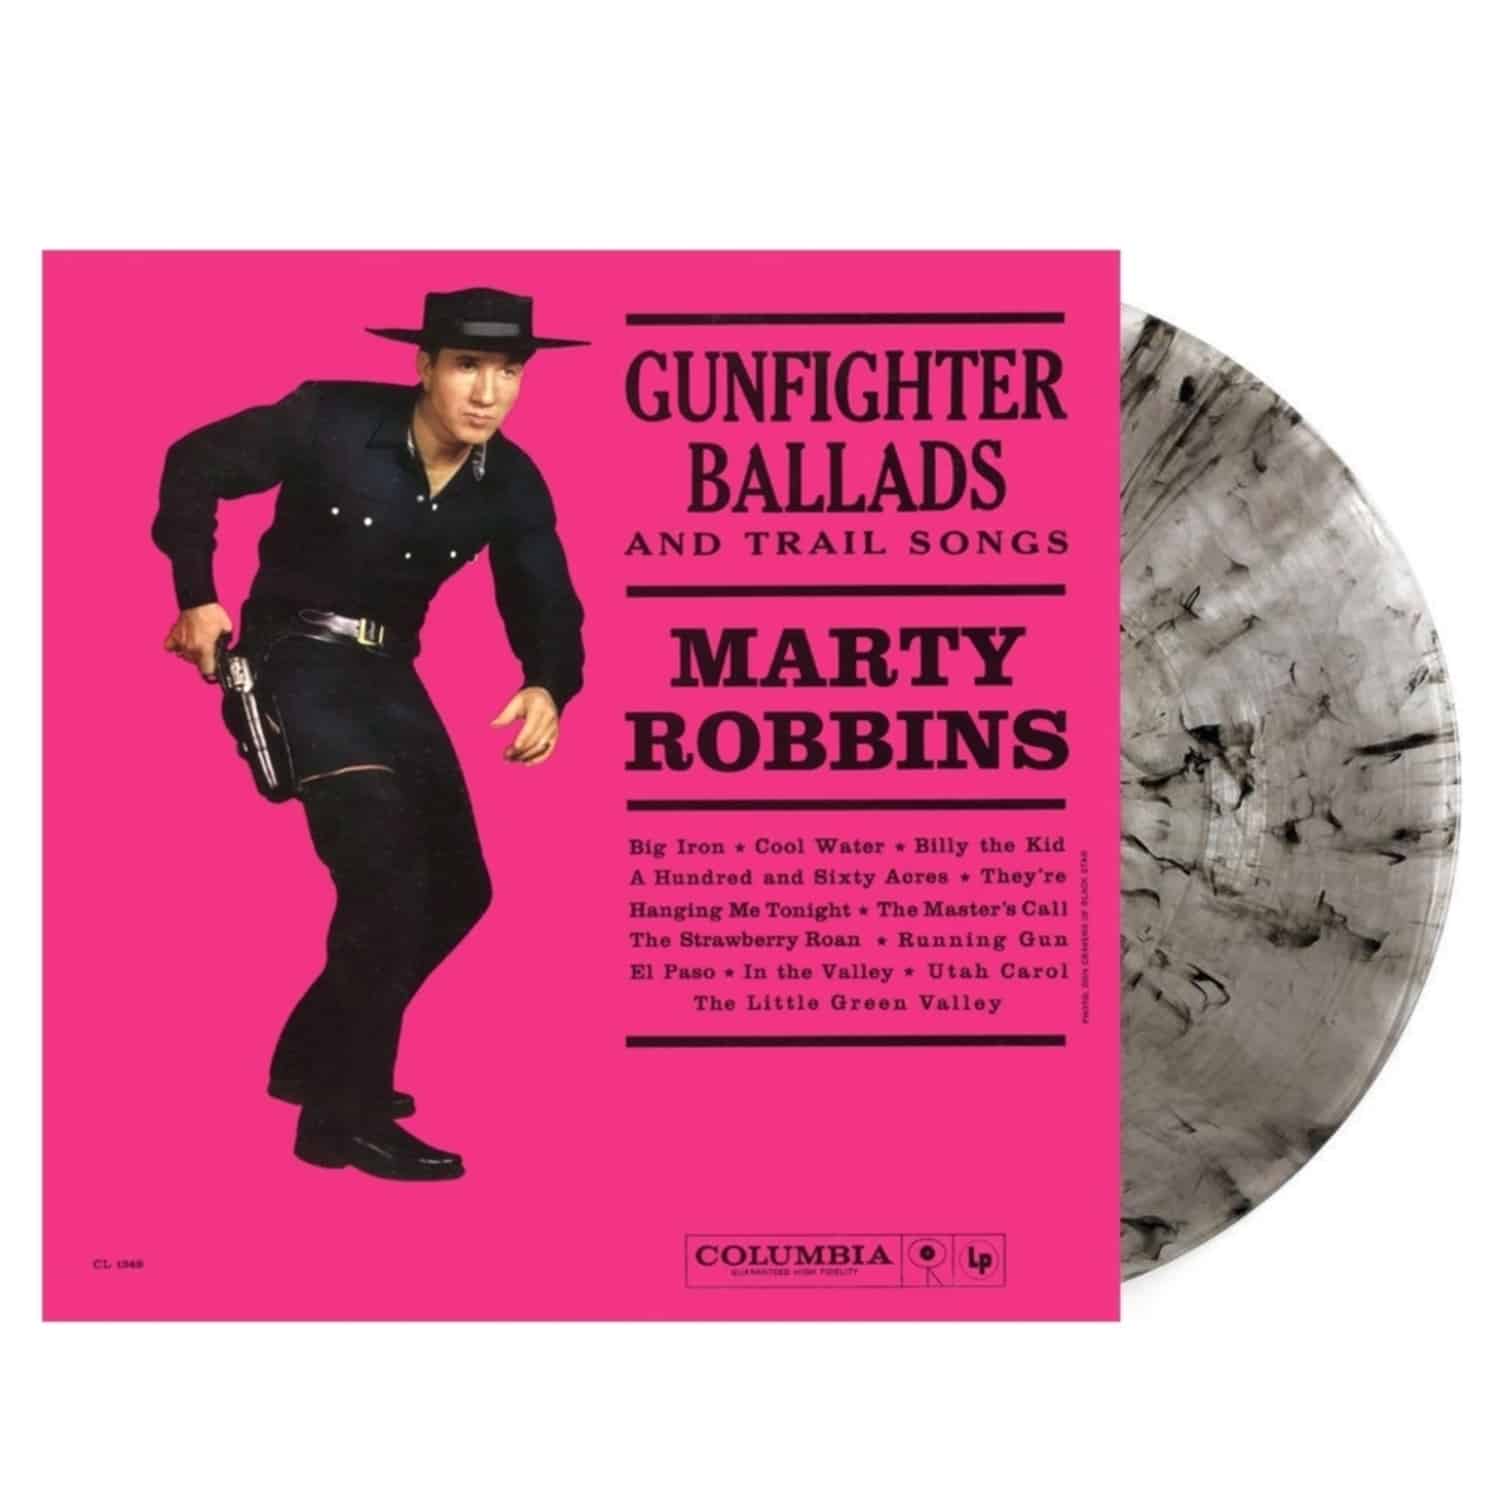 Marty Robbins - SINGS GUNFIGHTER BALLADS AND TRAIL SONGS 